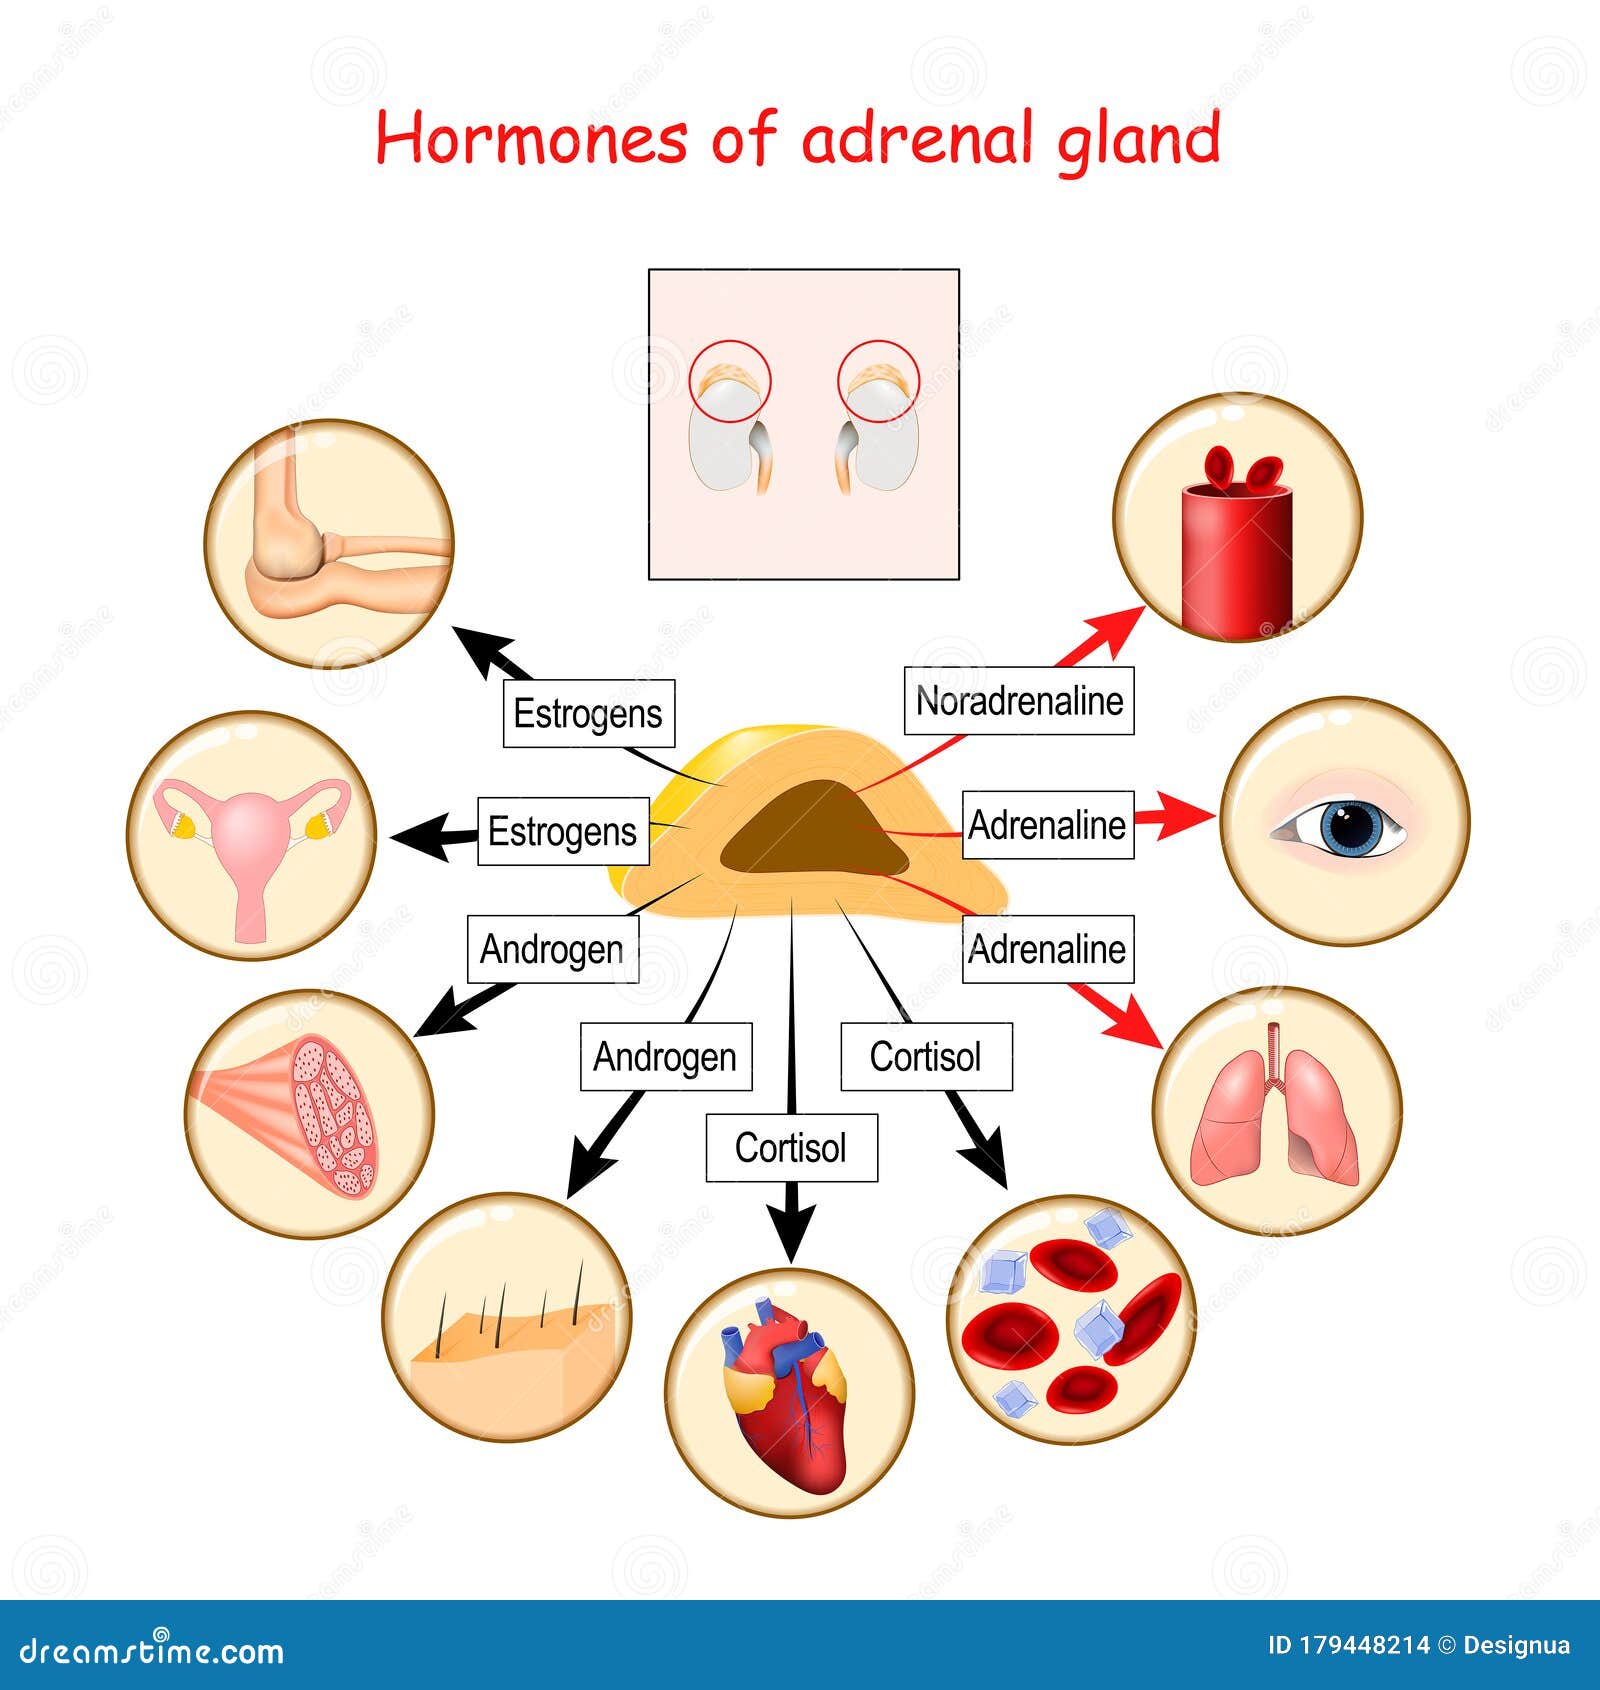 hormones of adrenal gland and human organs that respond to hormones